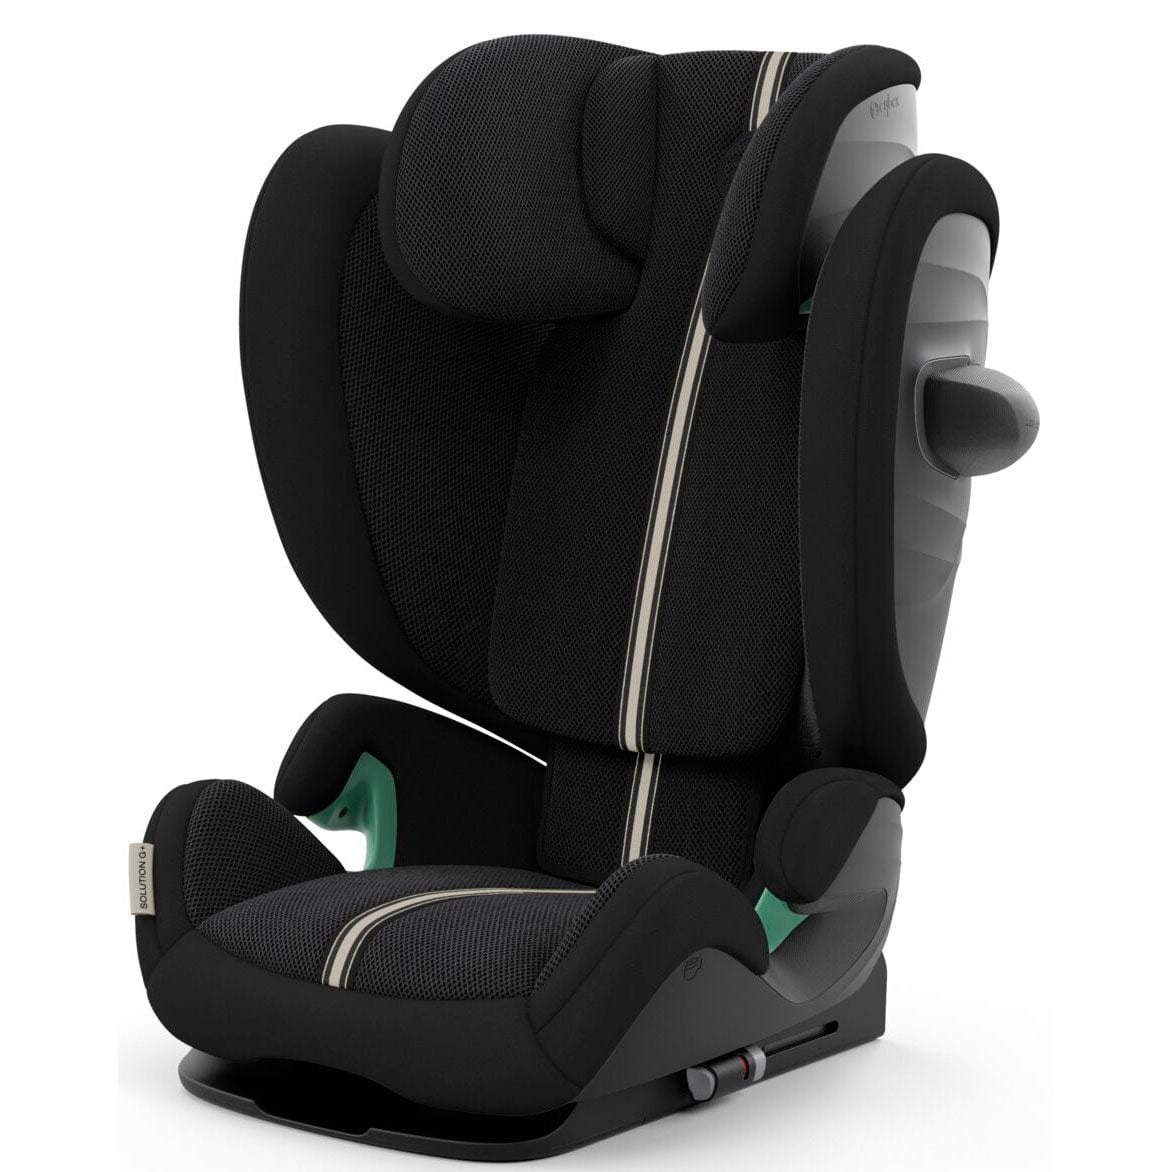 Cybex highback booster seats Cybex Solution G i-Fix Plus Highback Booster in Moon Black 523001099